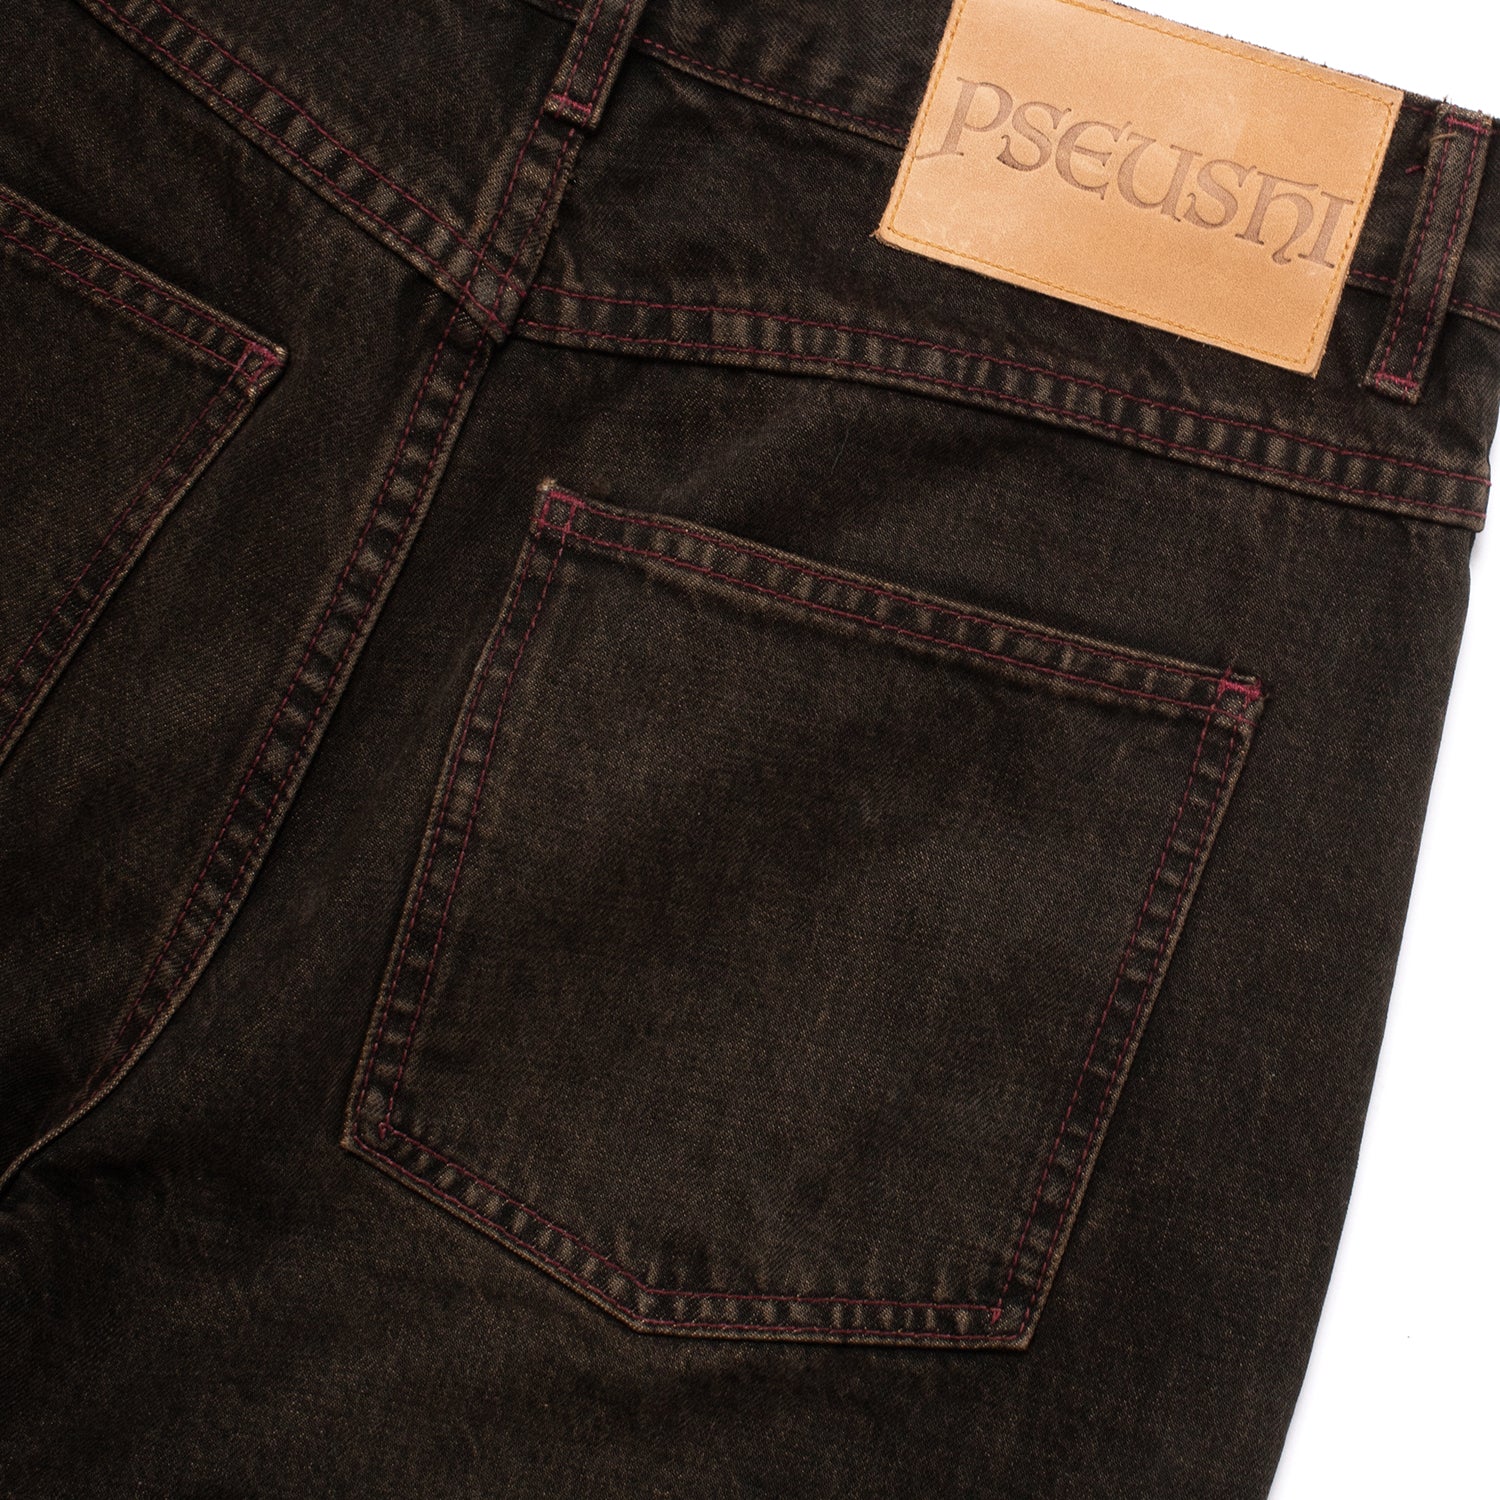 Pseushi Baggy Jeans in Mud Wash